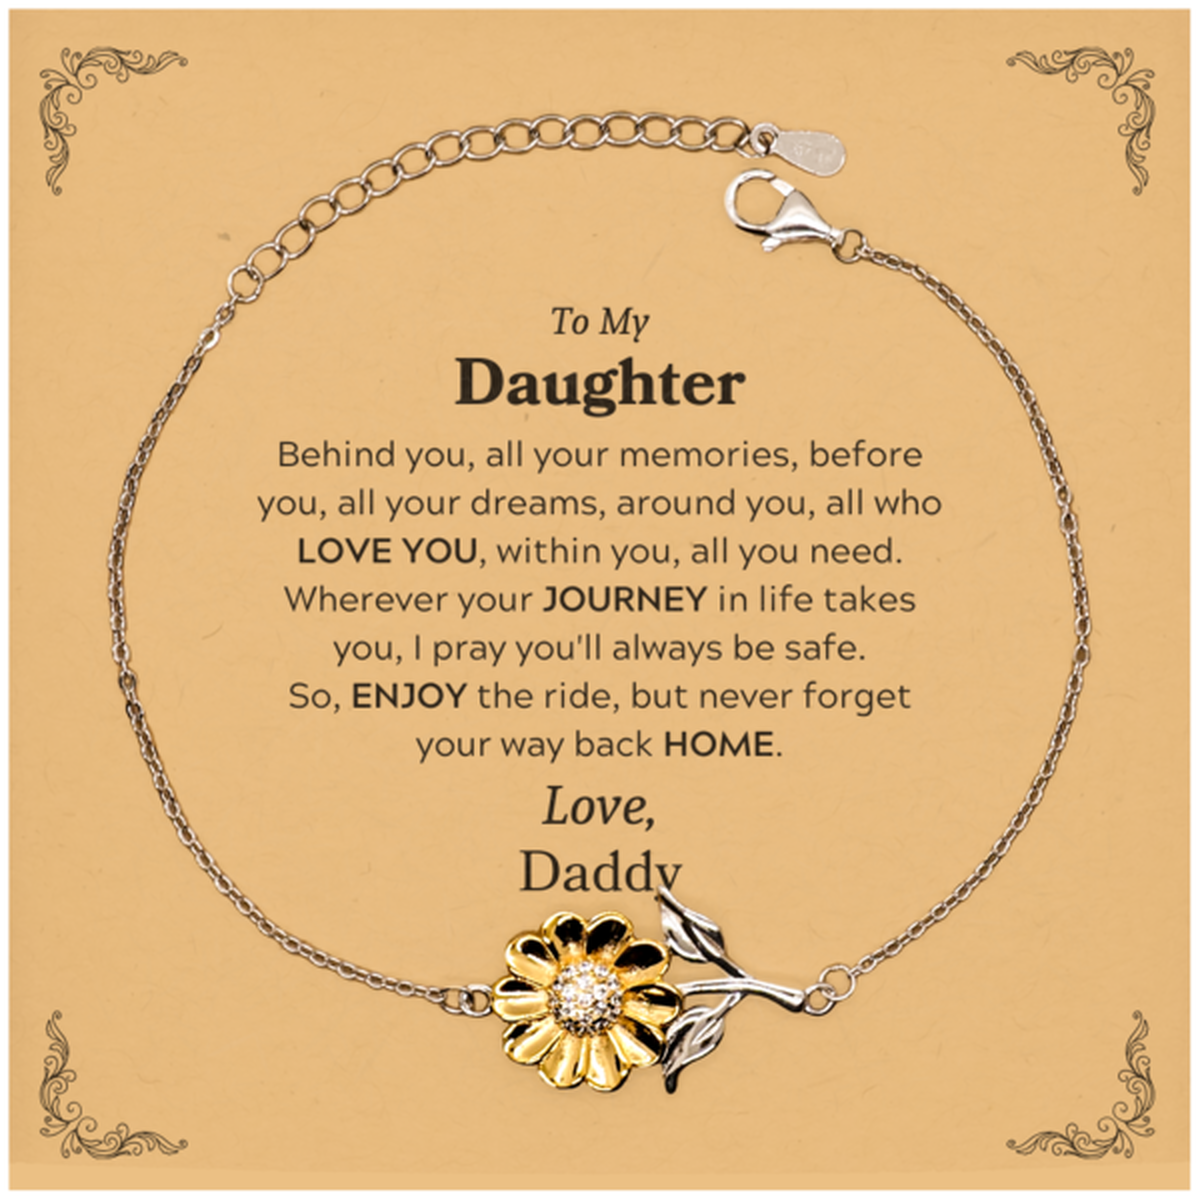 To My Daughter Graduation Gifts from Daddy, Daughter Sunflower Bracelet Christmas Birthday Gifts for Daughter Behind you, all your memories, before you, all your dreams. Love, Daddy